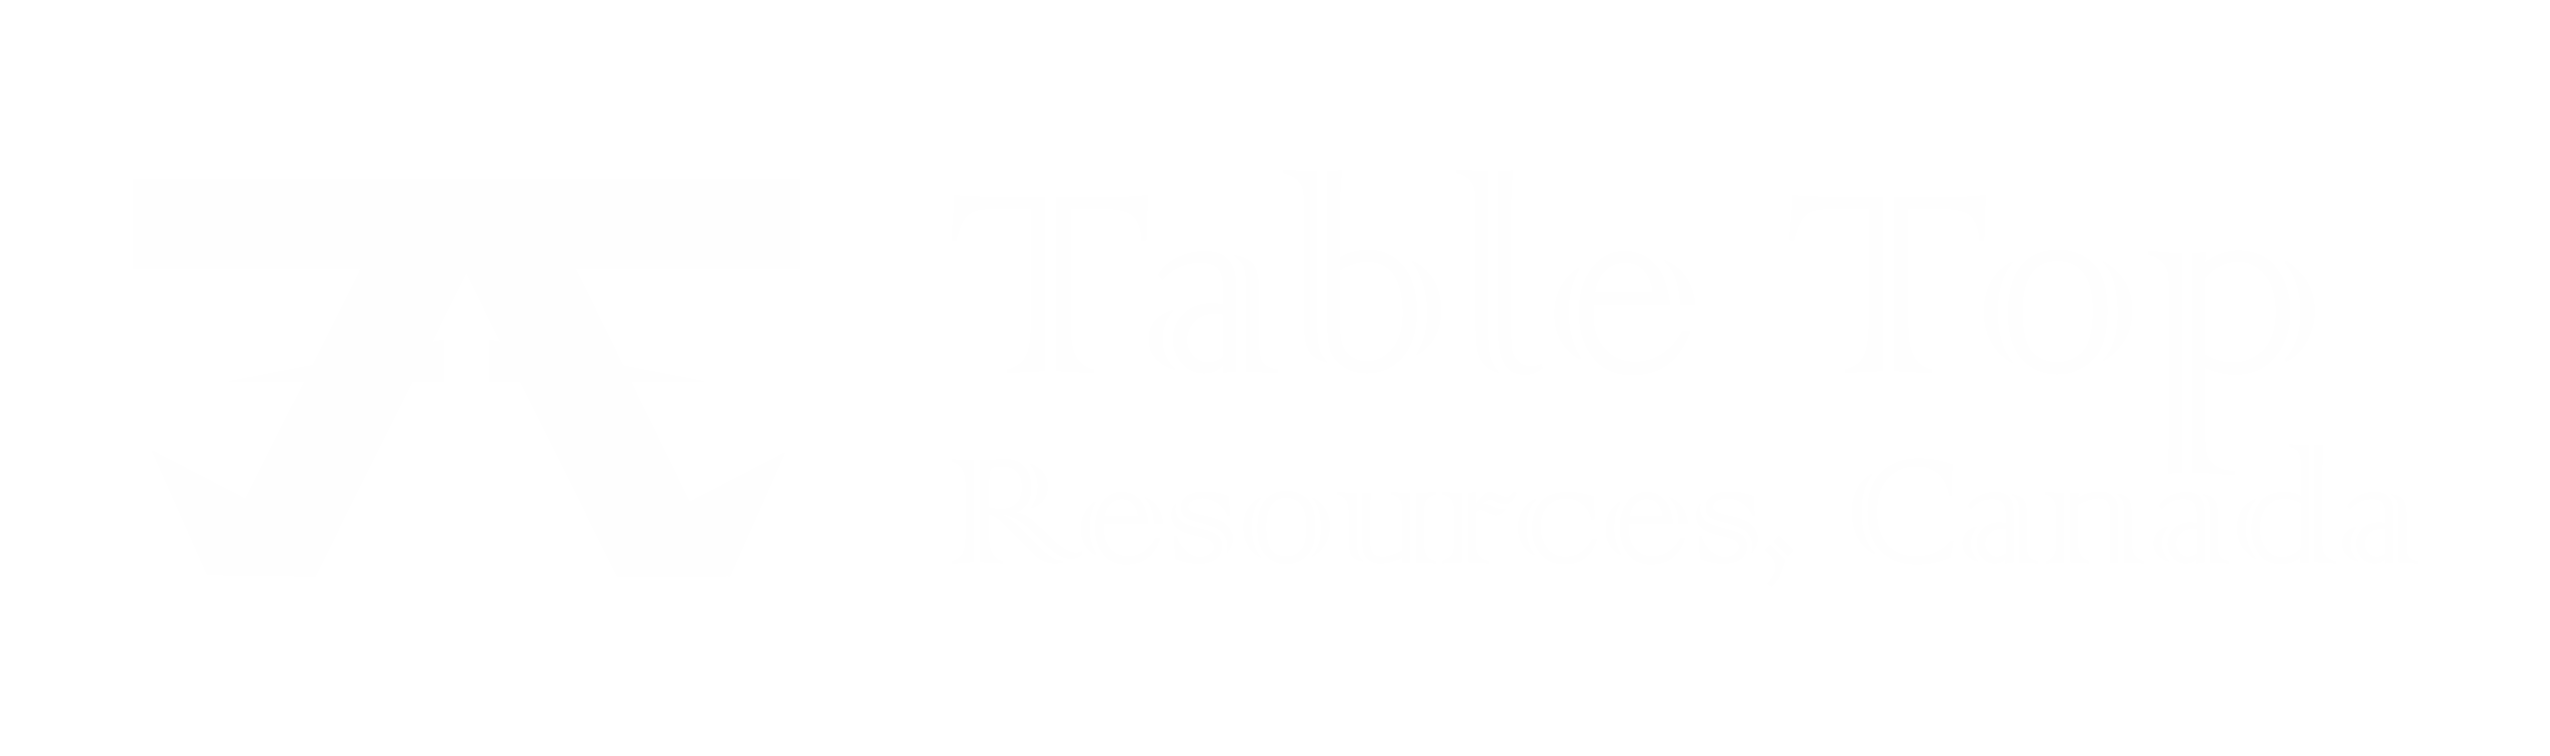 Table top